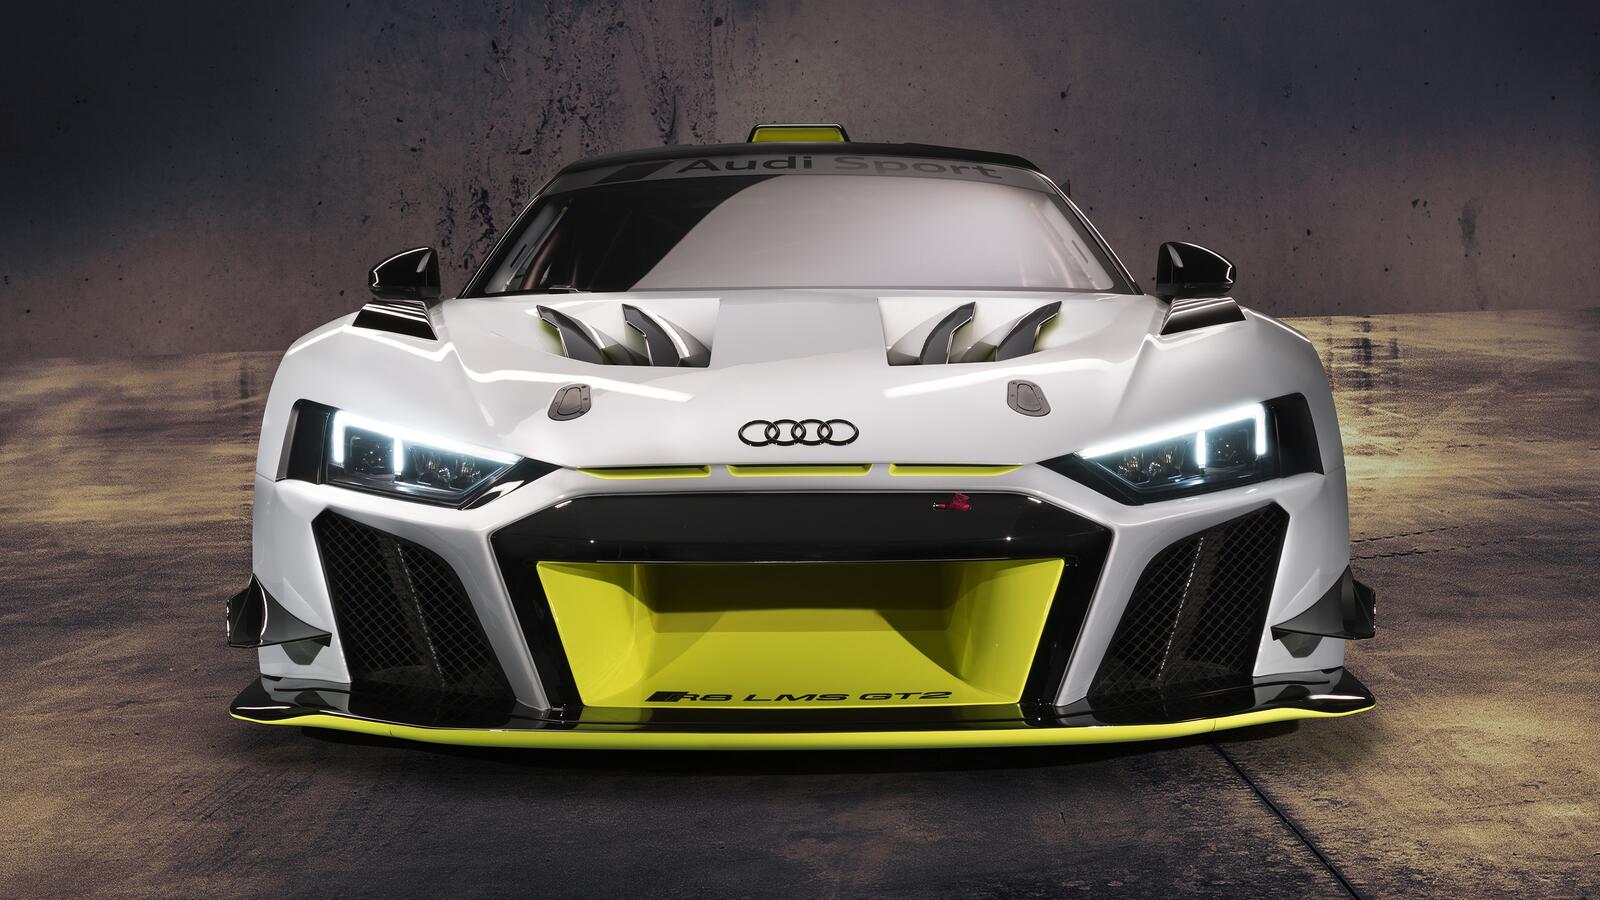 Free photo Audi r8 lms gt2 front view